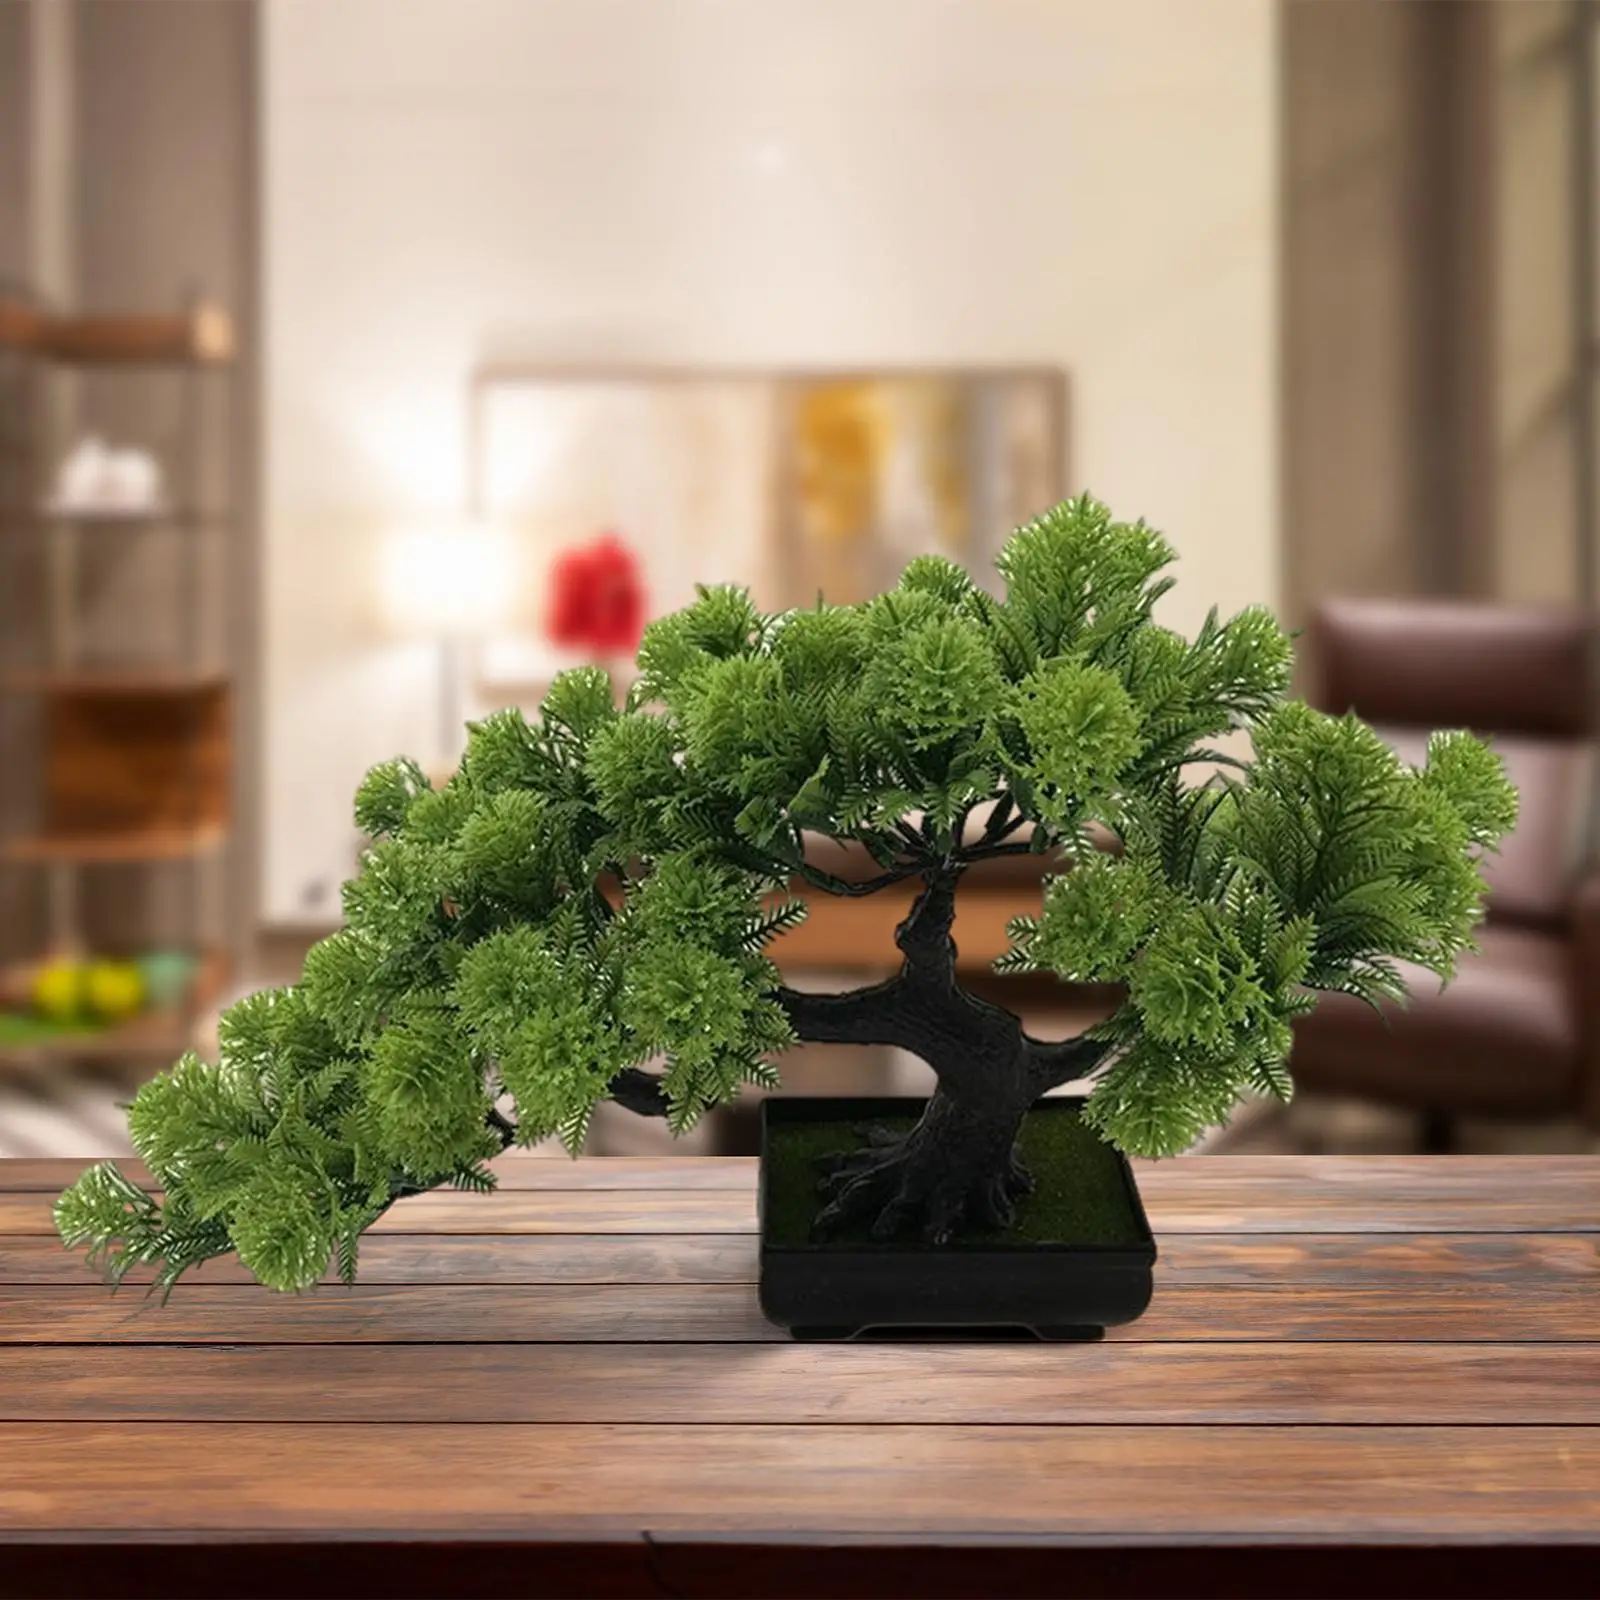 Small Artificial Bonsai Pine Tree Simulation Bonsai Potted Desktop Display Tree for Windowsill Indoor Home Office Decor